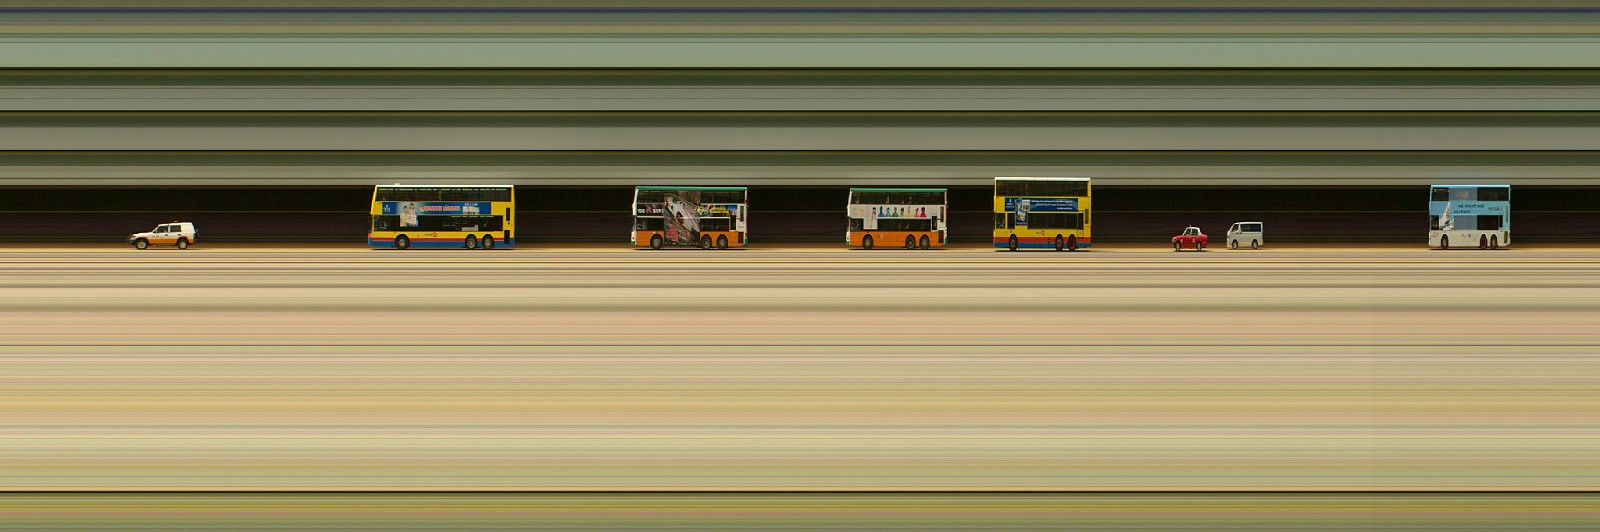 Jay Mark Johnson, HONG KONG 9-1, 2008 Hong Kong CN
archival pigment on paper, mounted on aluminum, 40 x 120 in. (101.6 x 304.8 cm)